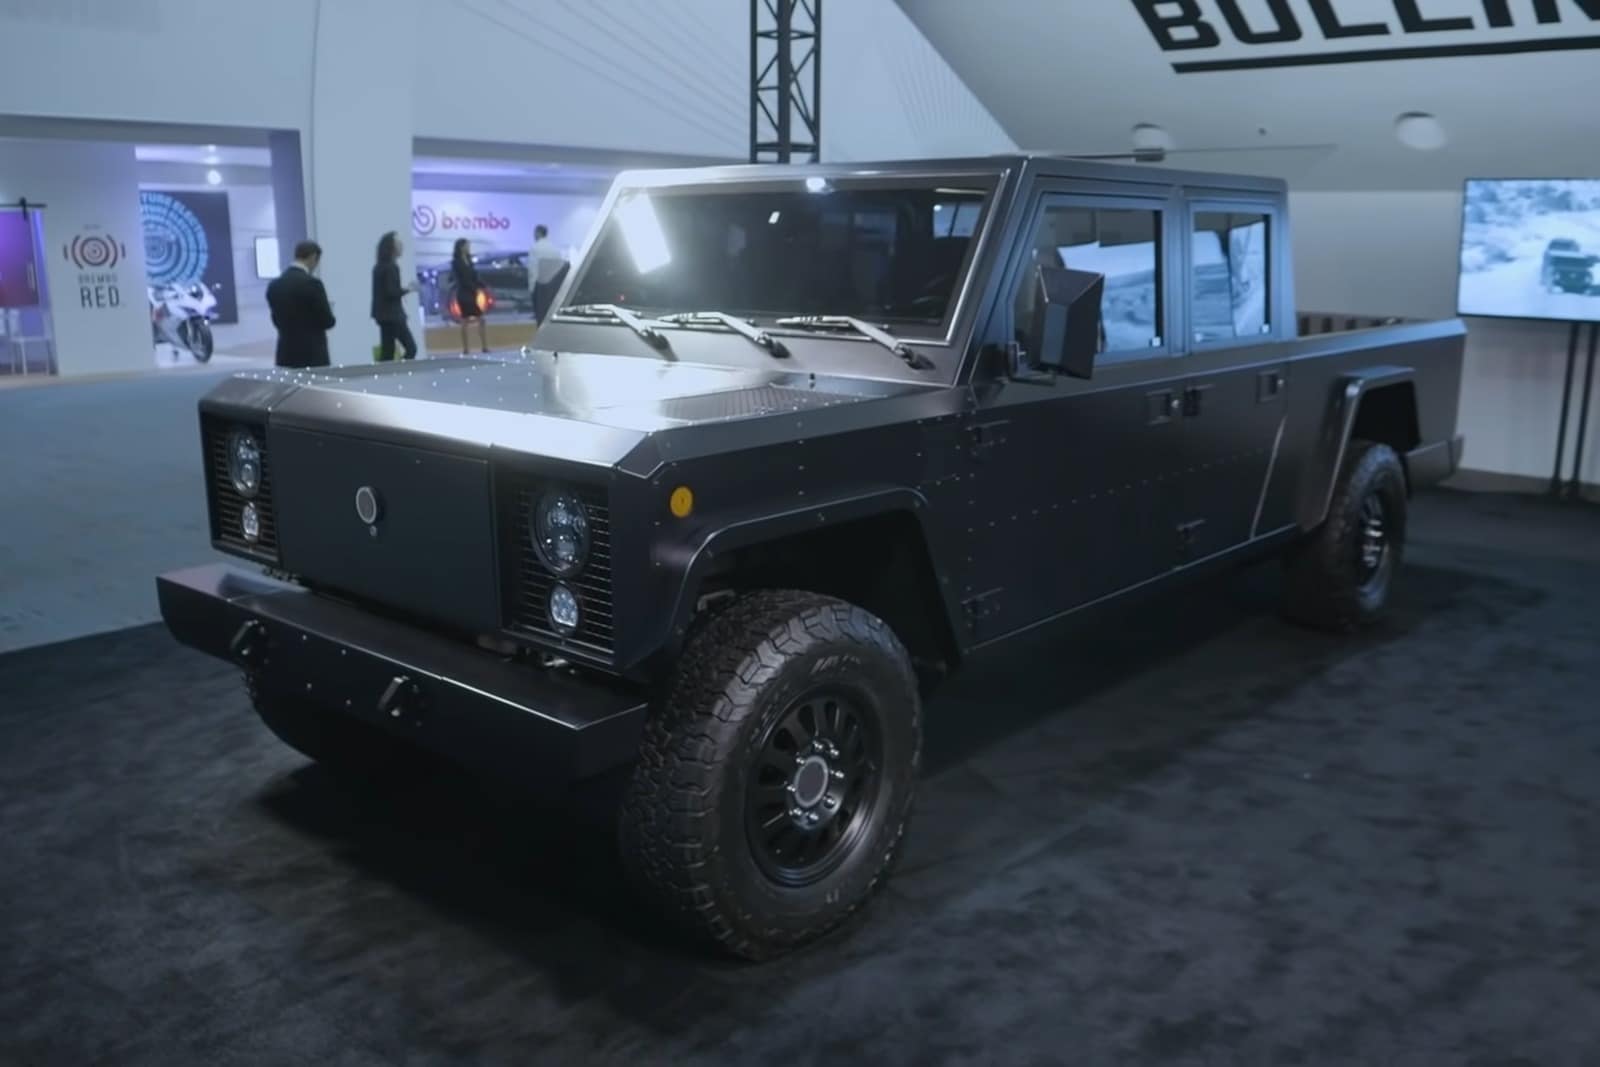 Bollinger Takes a Cue From Tesla and Delays Its B1 and B2 Trucks Indefinitely 